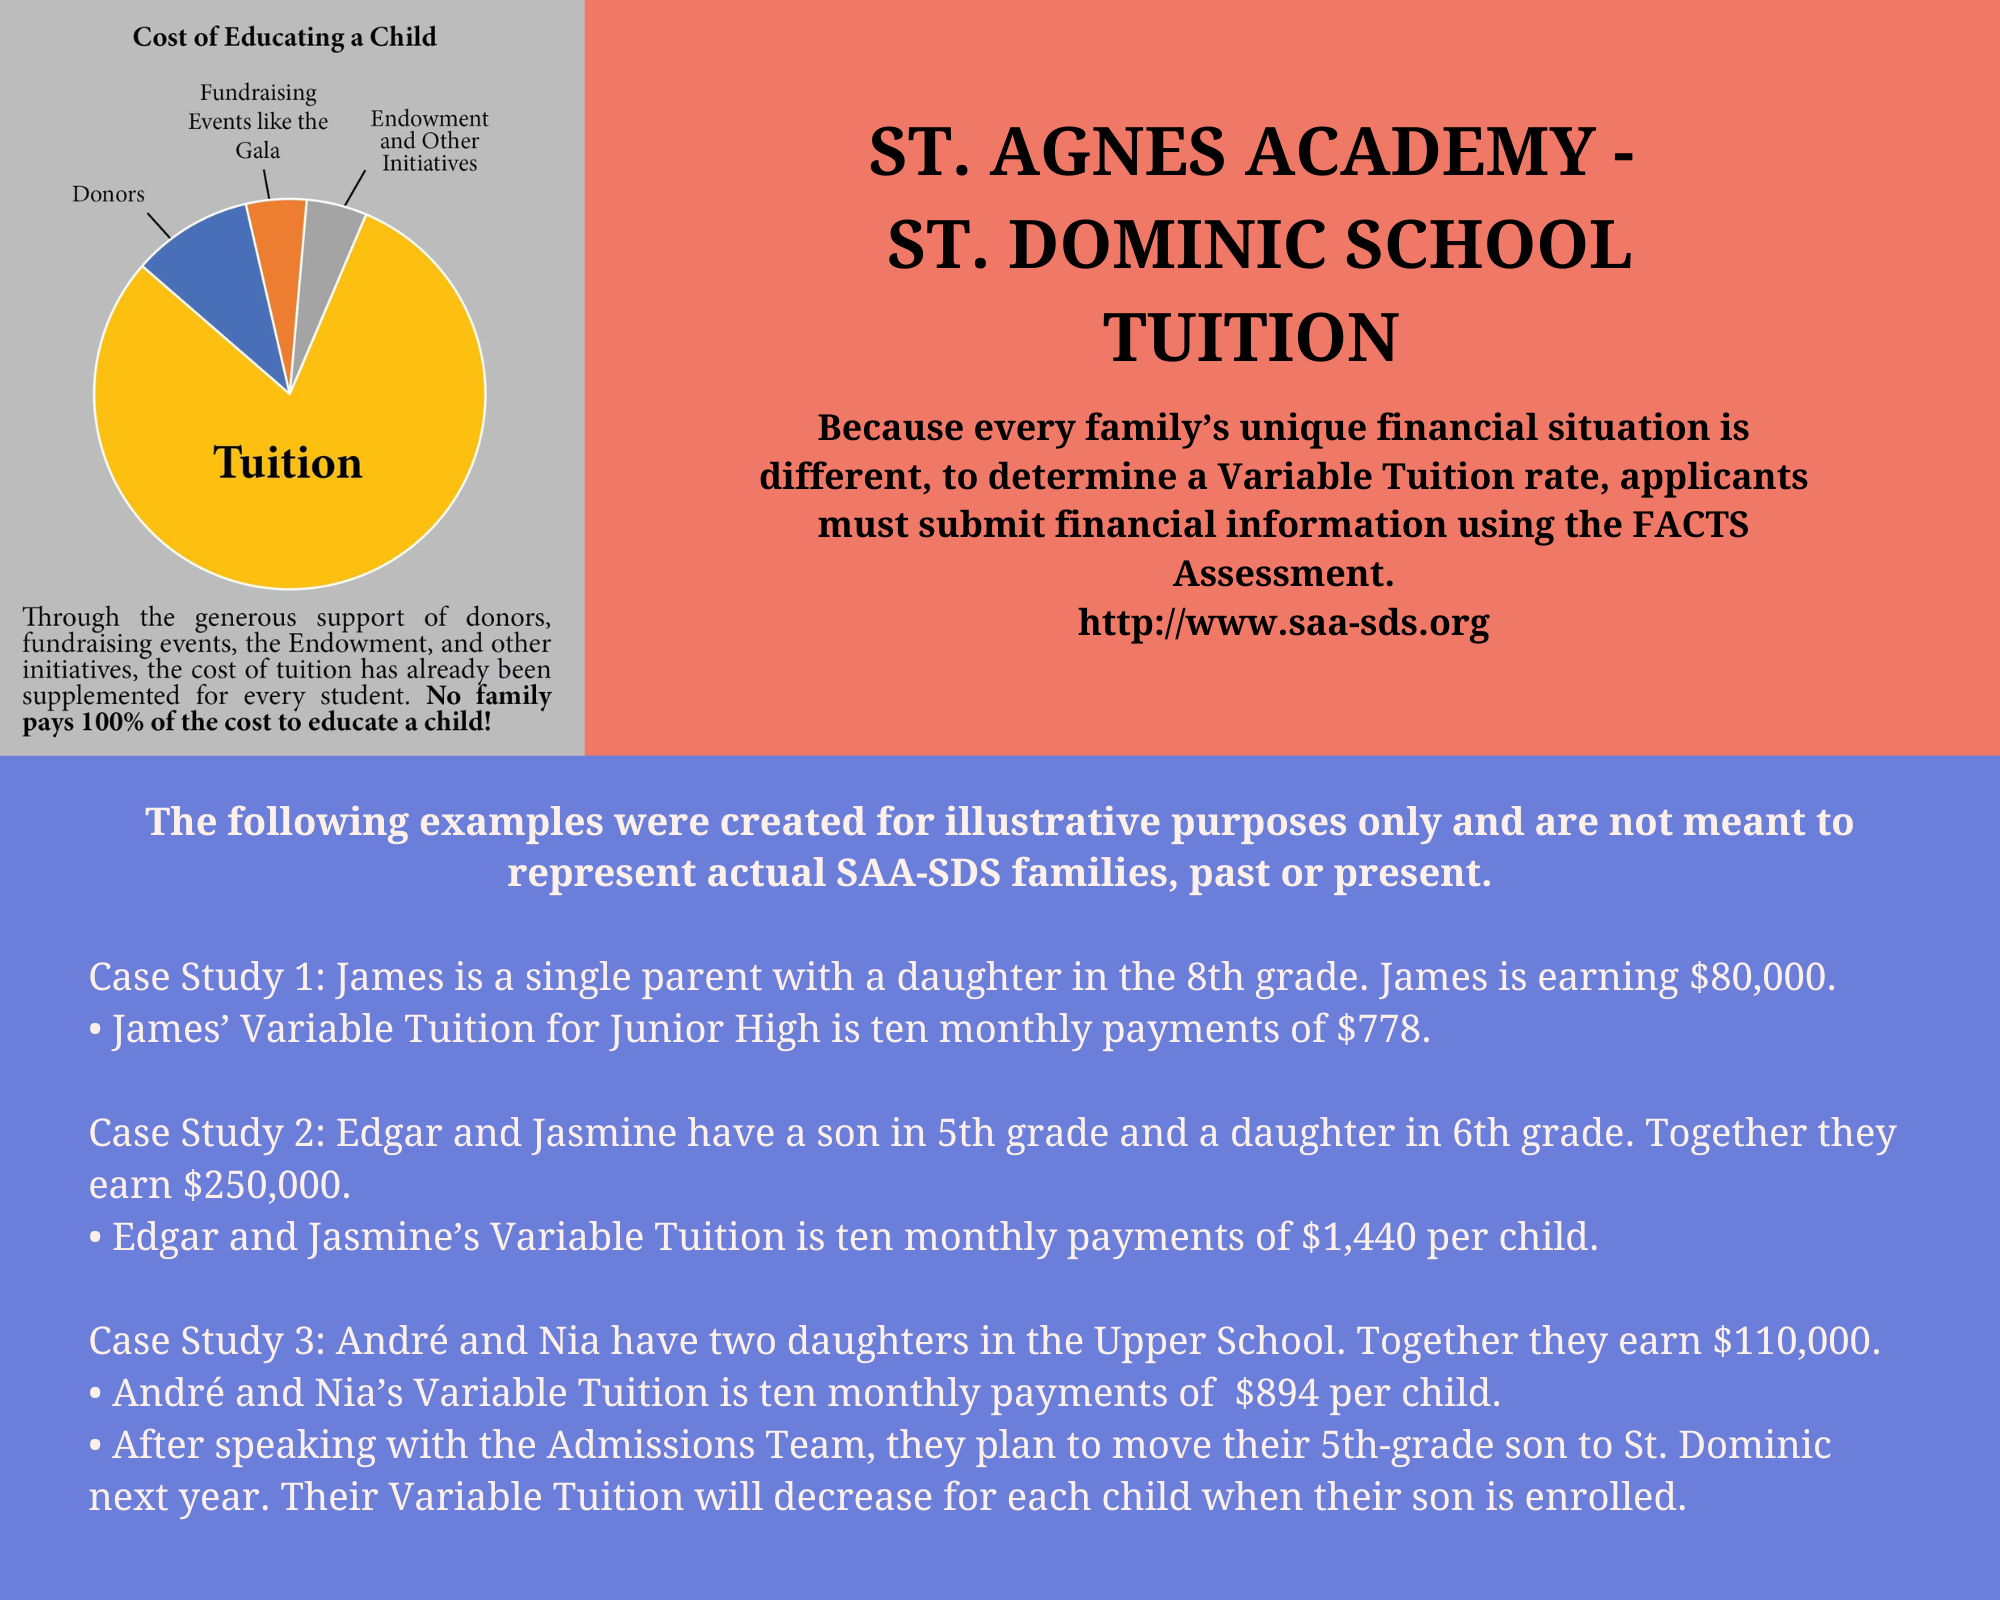 St. Agnes Academy and St. Dominic School Tuition (1)